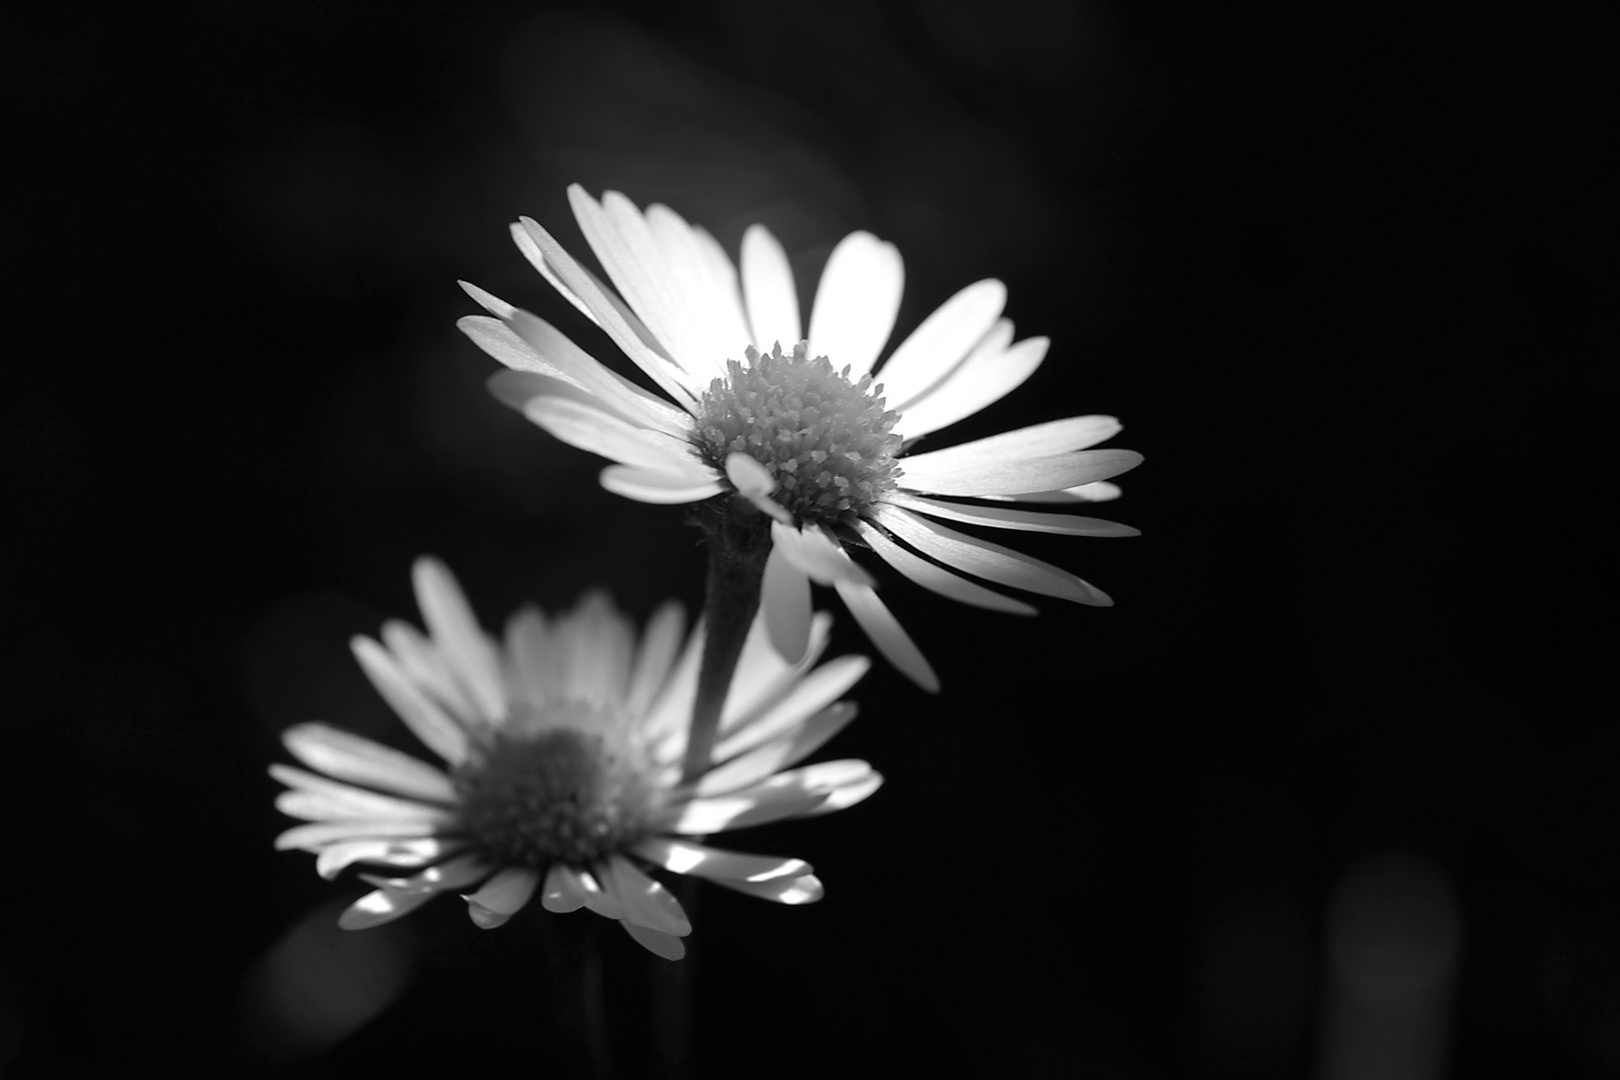 Nature in black and white I